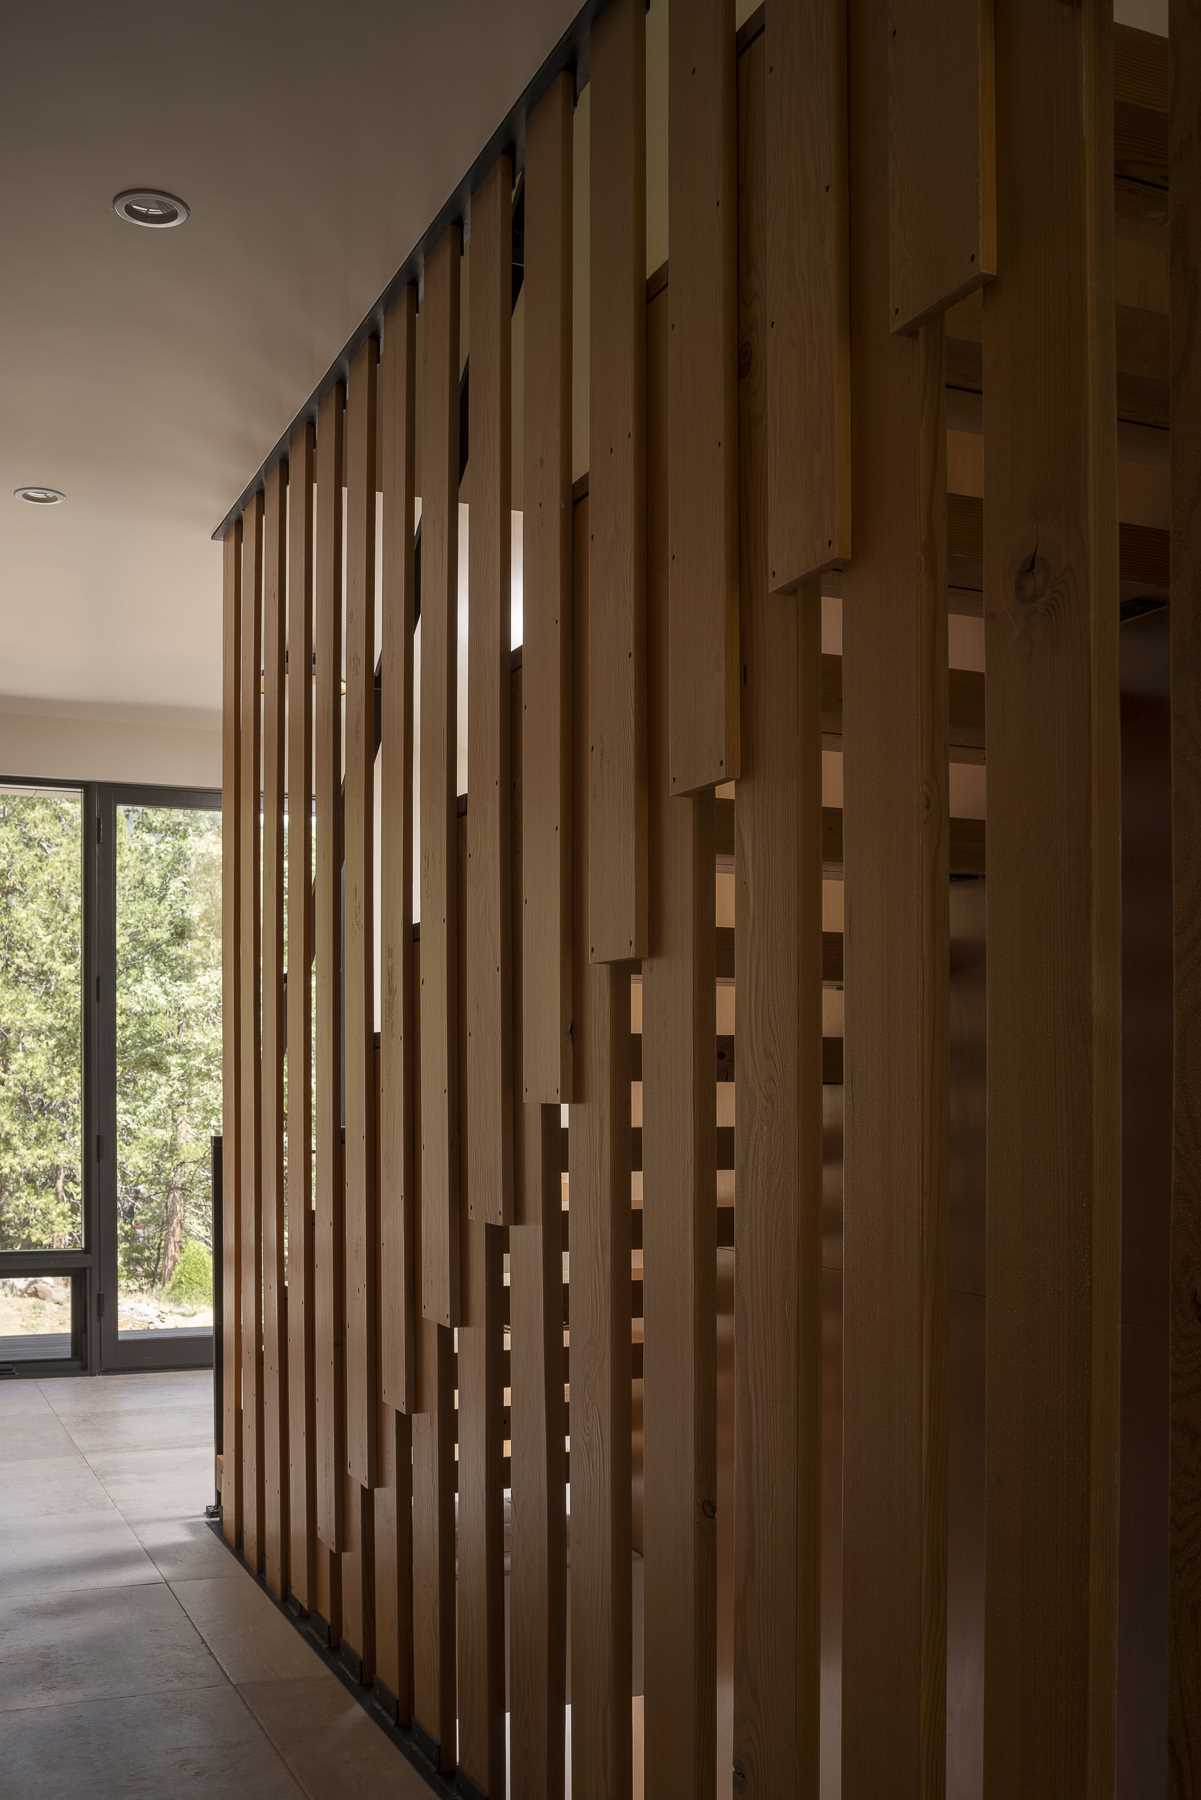 The main floor stair treads are fa،oned from thick pieces of reclaimed fir and give the impression of a floating staircase; ،wever, they are cleverly supported by a series of overlapping slats that ec، the vertical layout of the exterior siding and the surrounding trees.